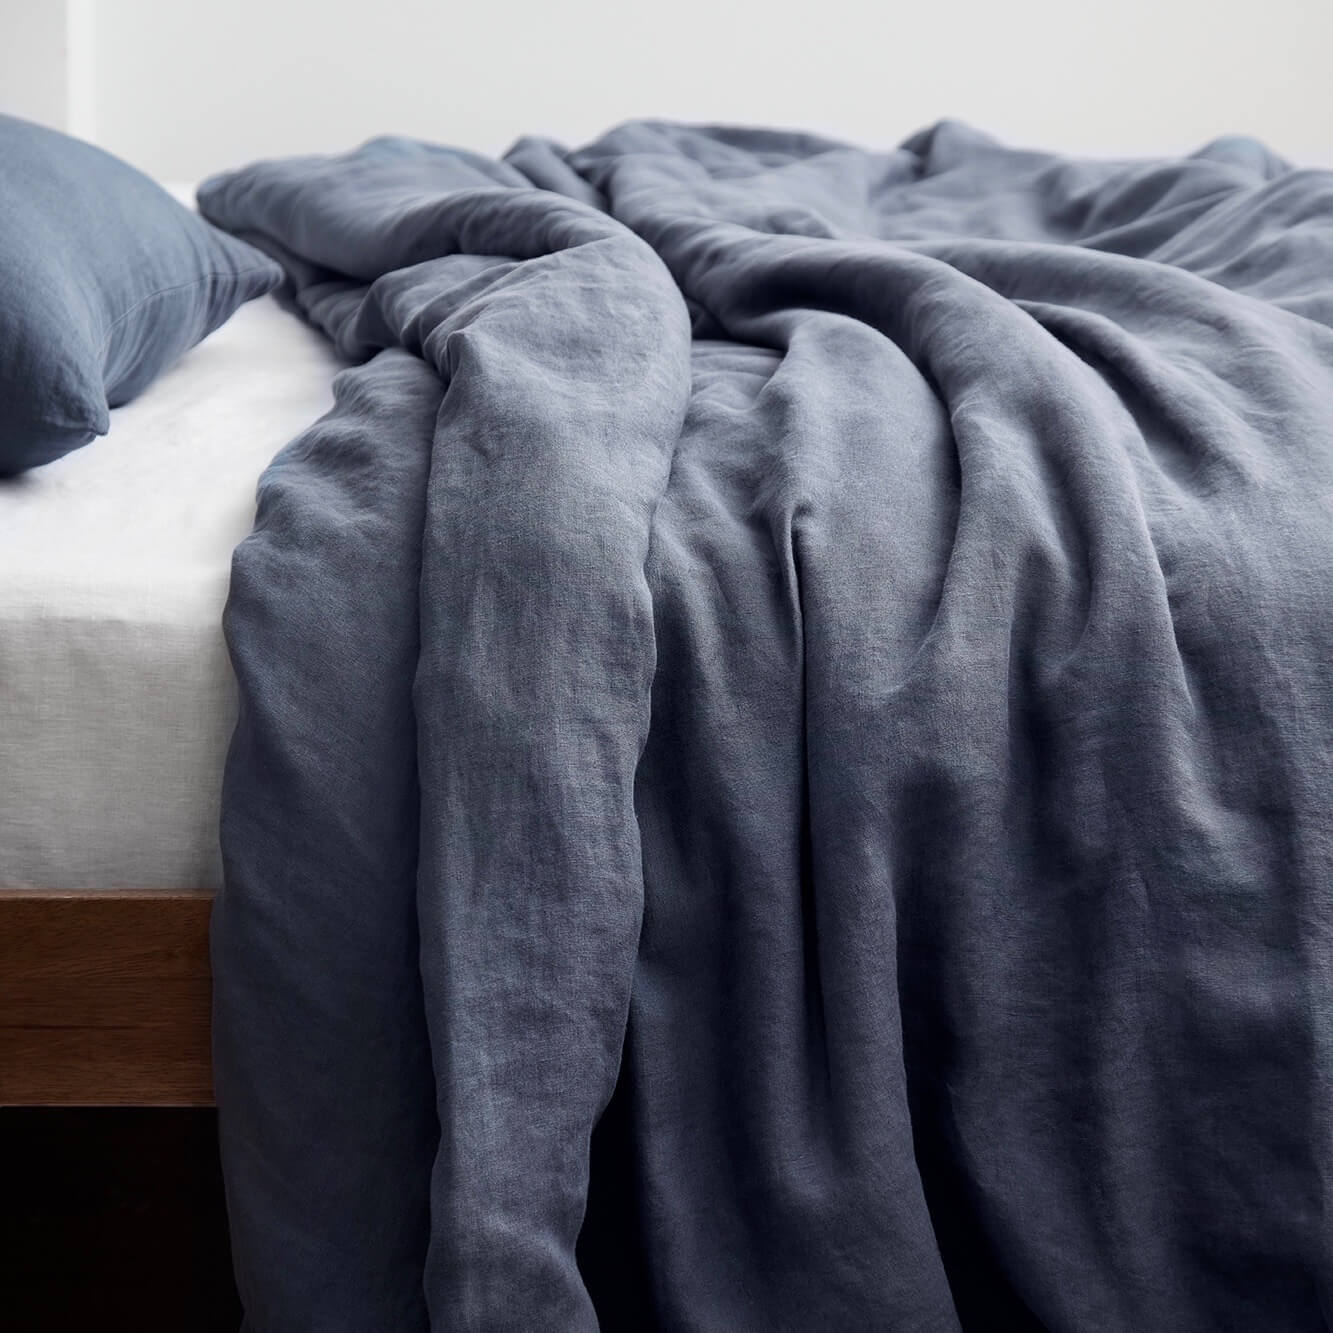 The Citizenry Stonewashed Linen Duvet Cover | Full/Queen | Duvet Only | Indigo Chambray - Image 10